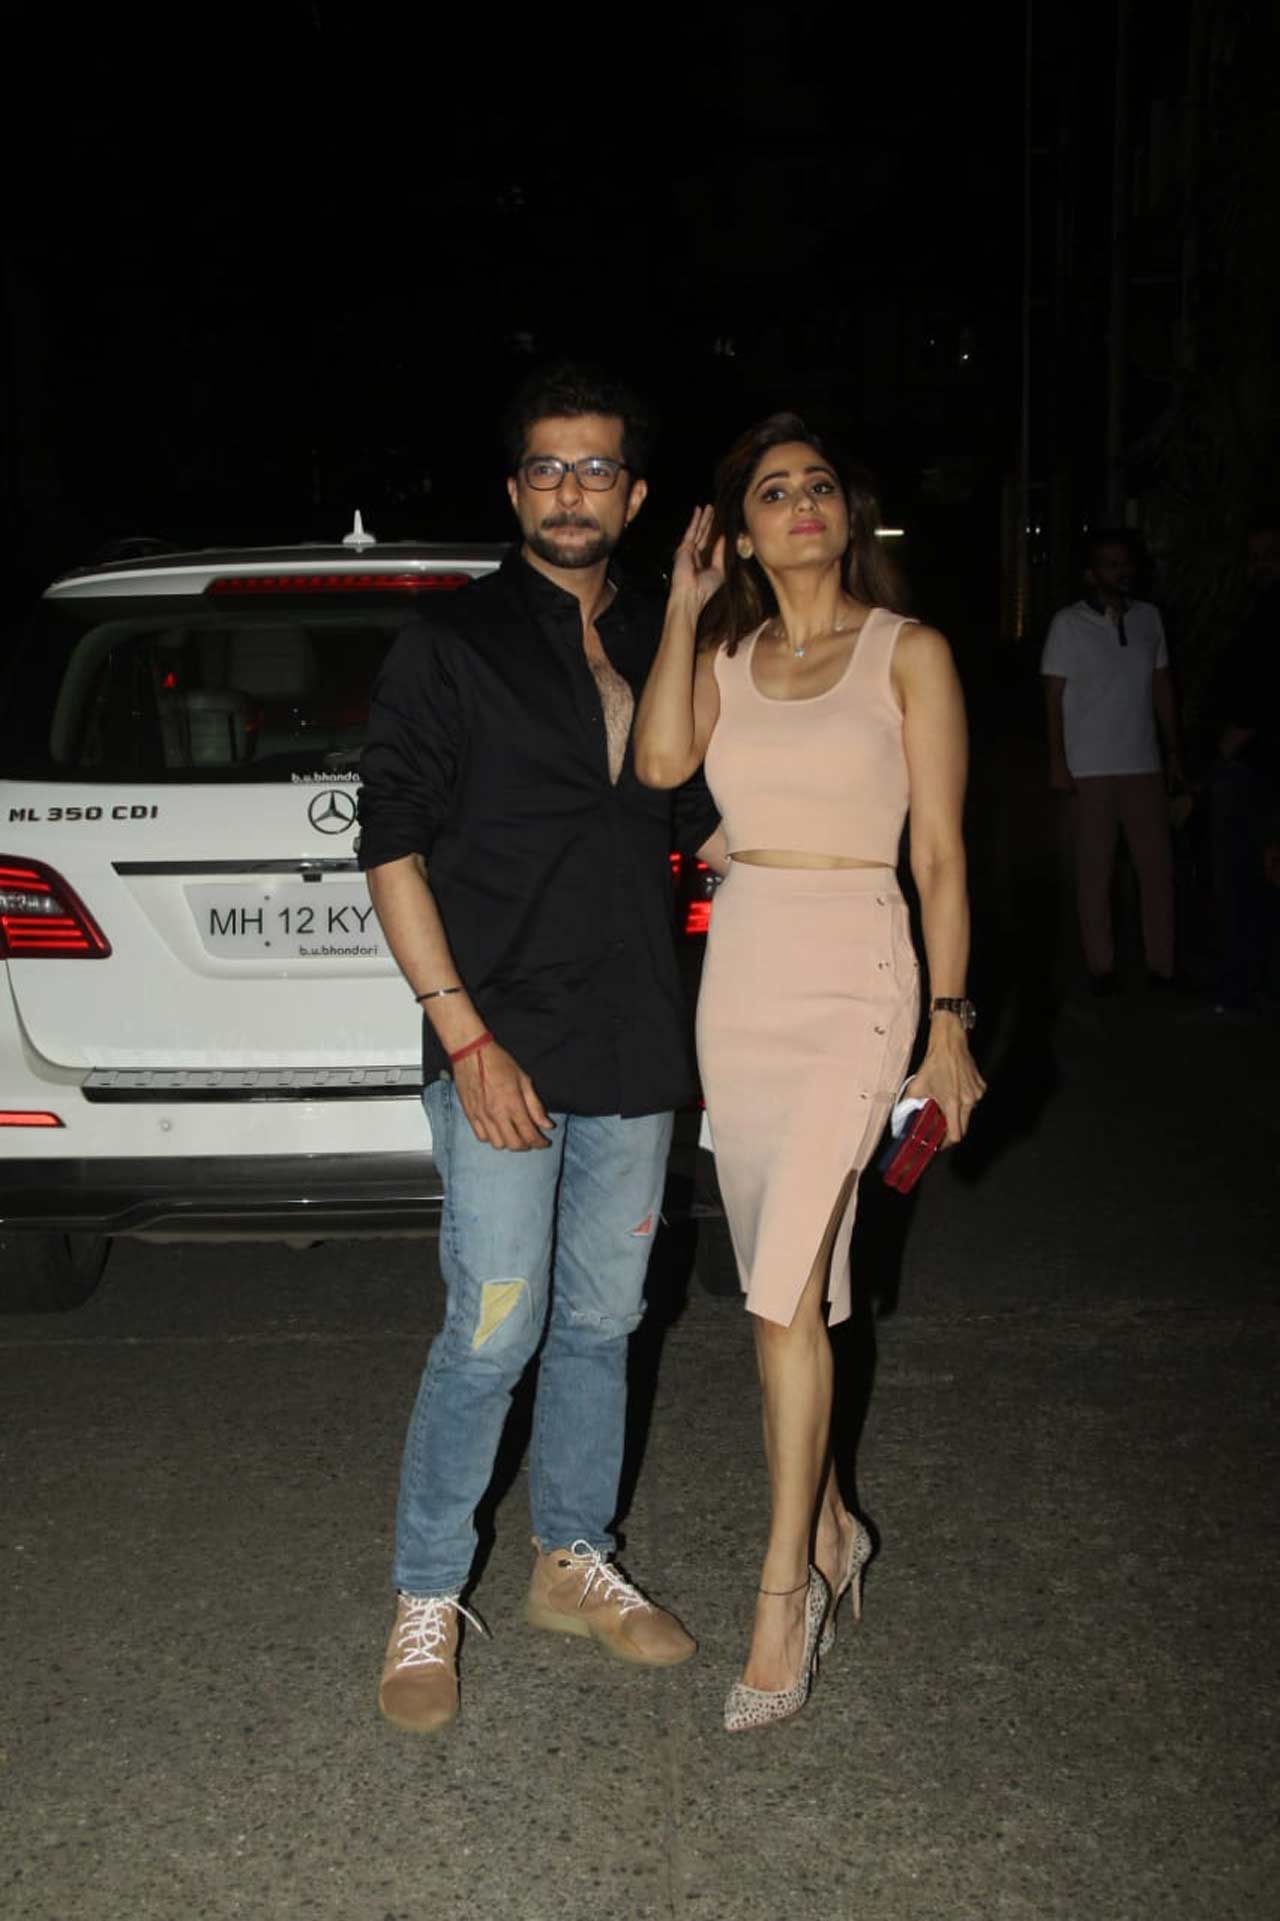 Now, as the duo is out of the house, Shamita and Raqesh have started making public appearances. After the show, this was the first time the couple was snapped on a dinner date at a popular restaurant in Bandra, Mumbai. Shamita was glowing as she posed with her 'connection' Raqesh when snapped by the shutterbugs.